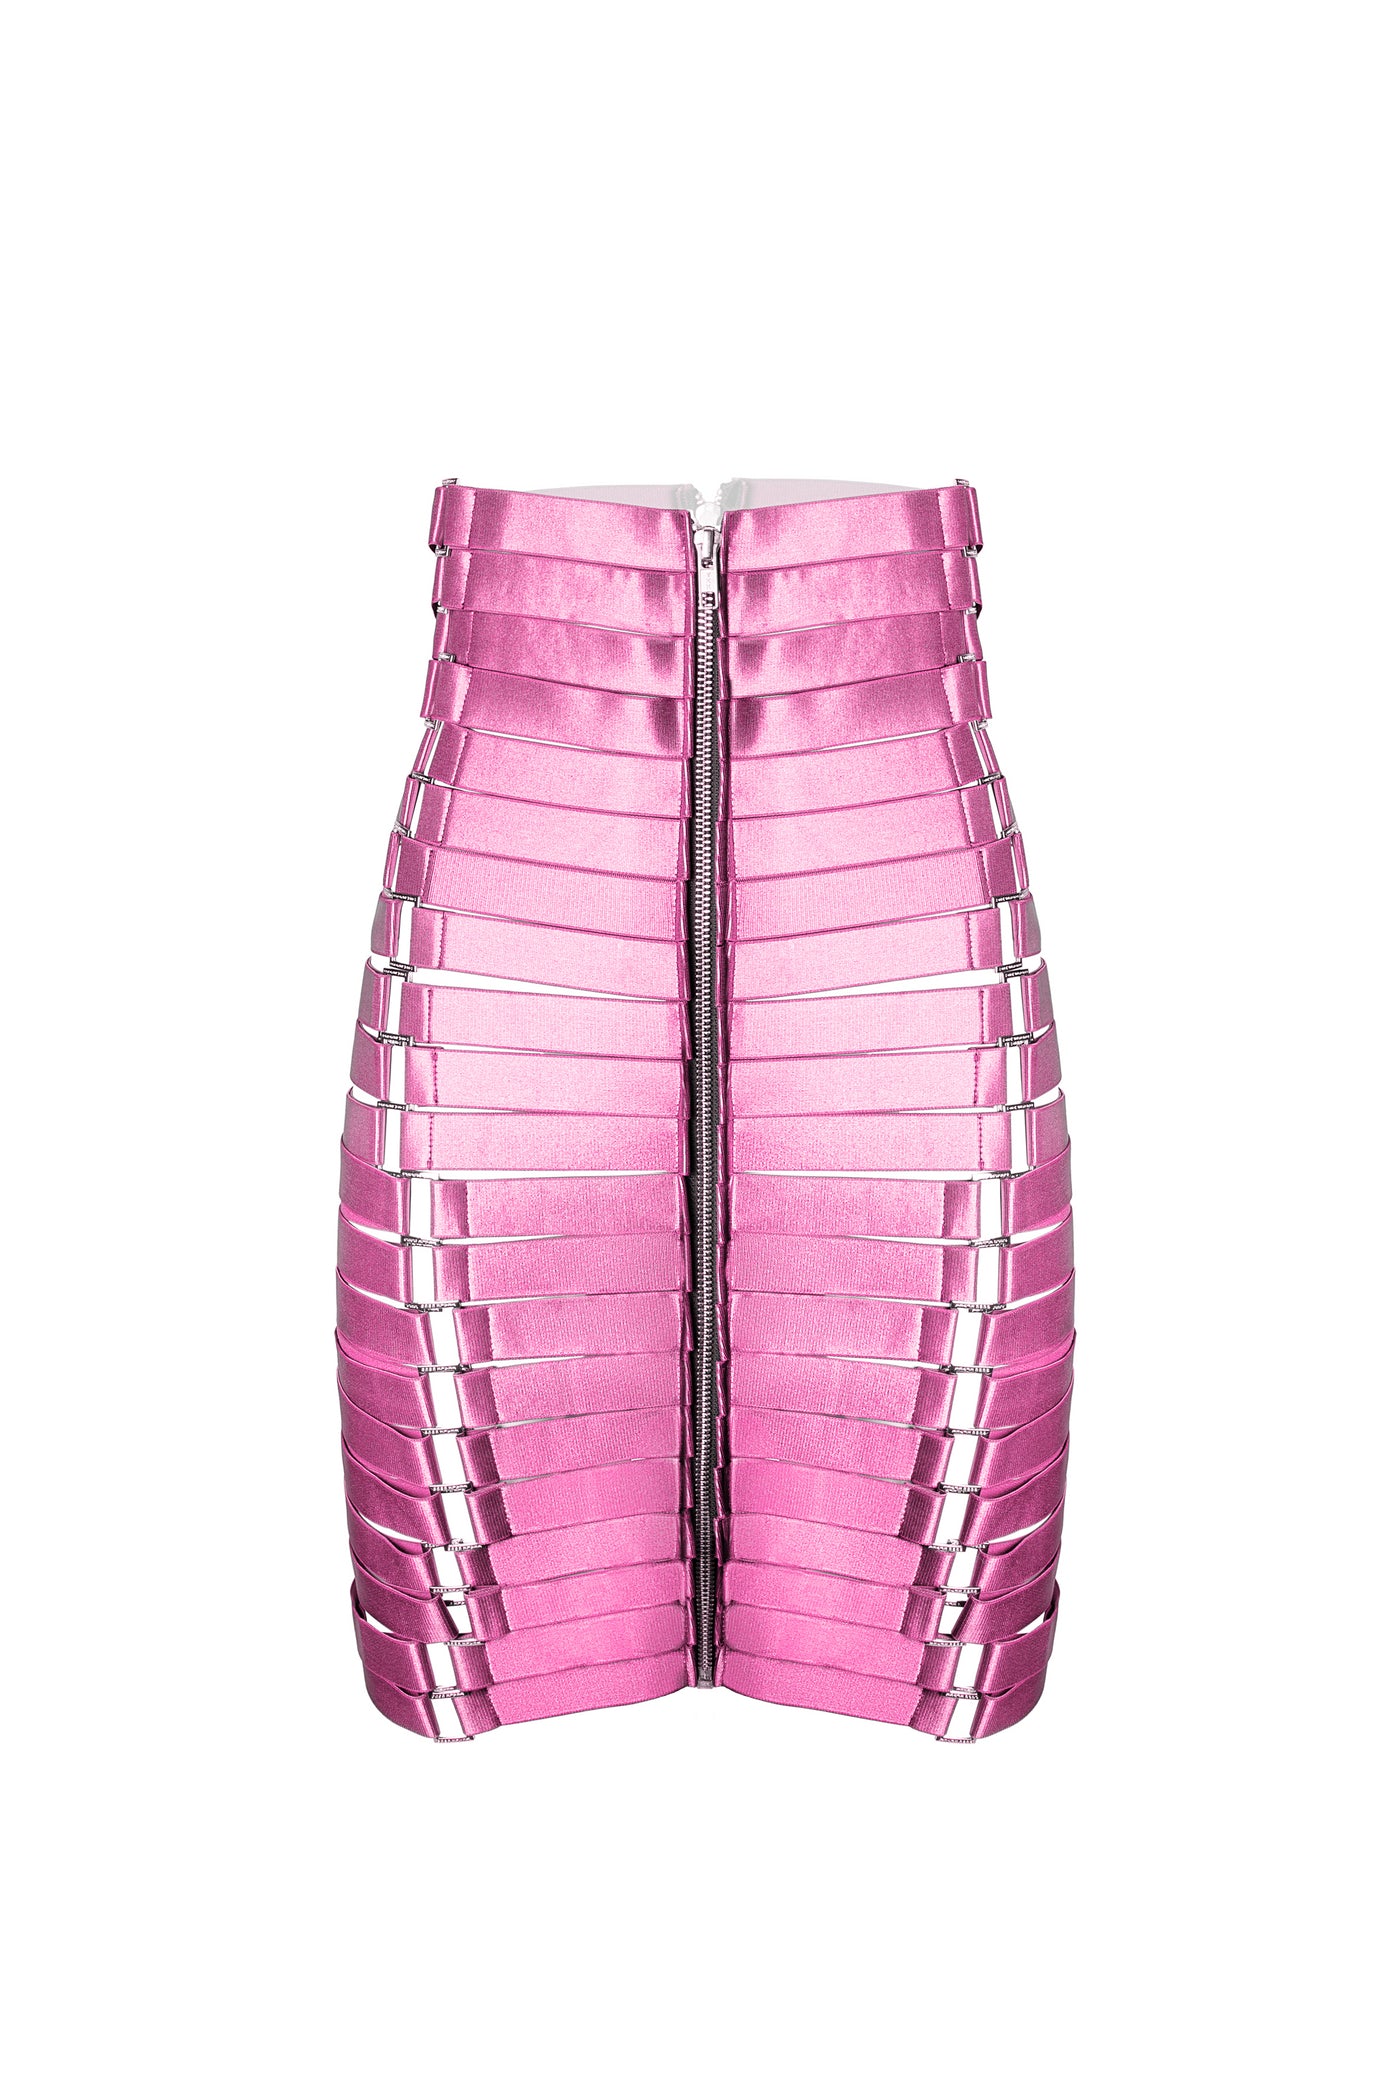 Lulo Skirt - Candy Pink